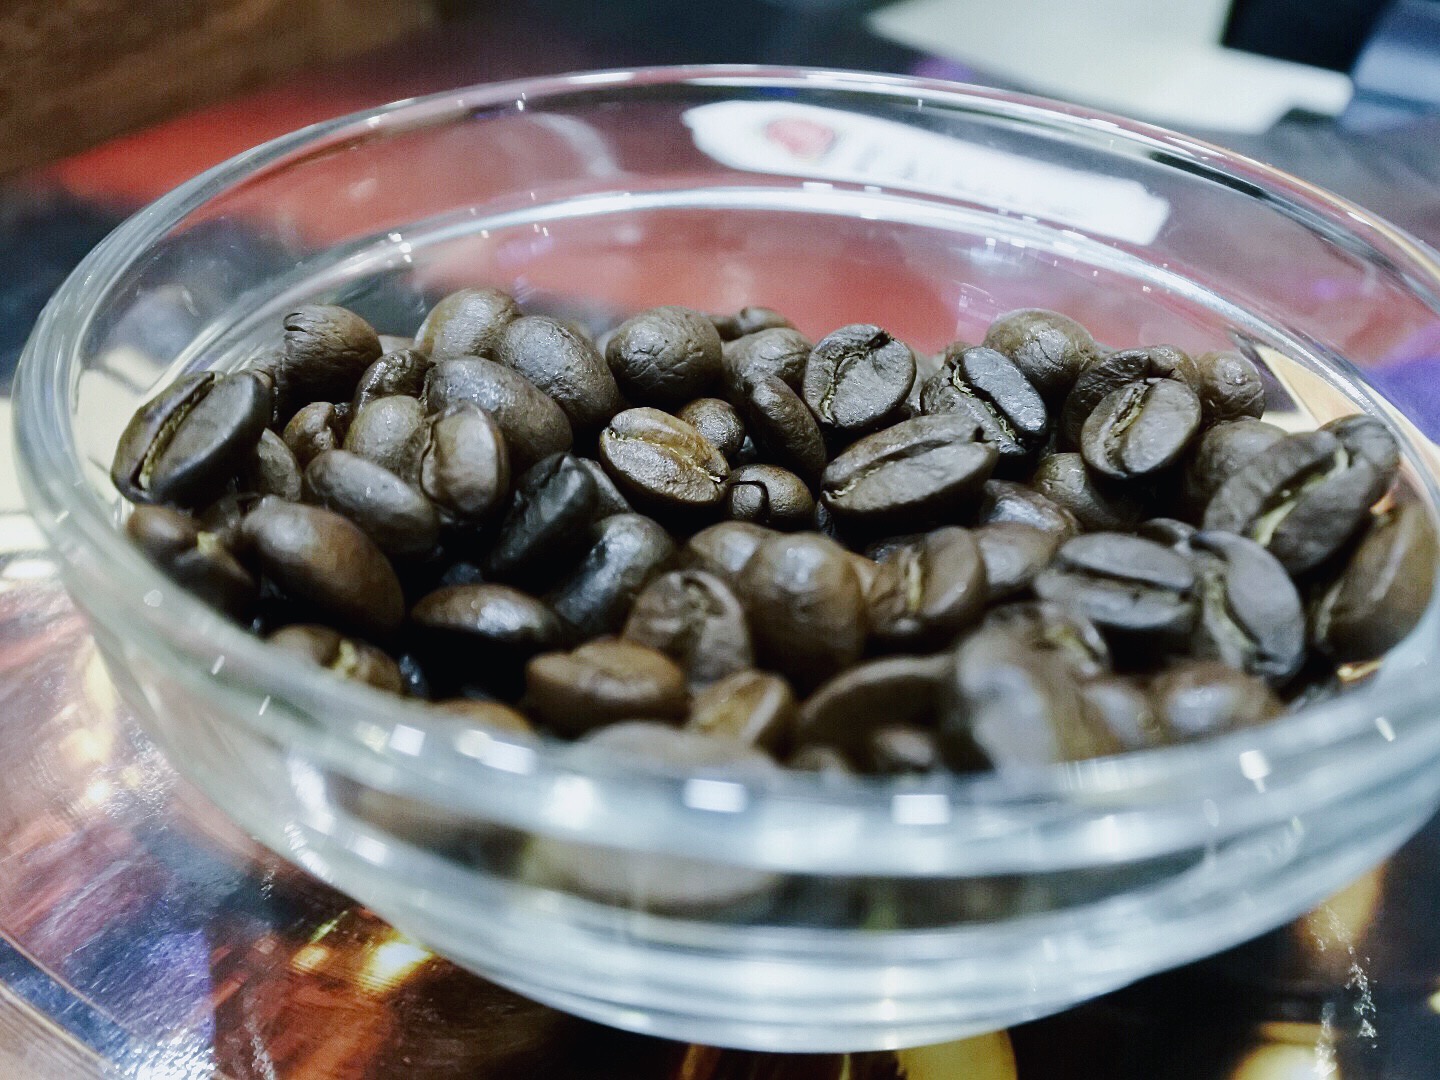 Divine smelling roasted coffee beans